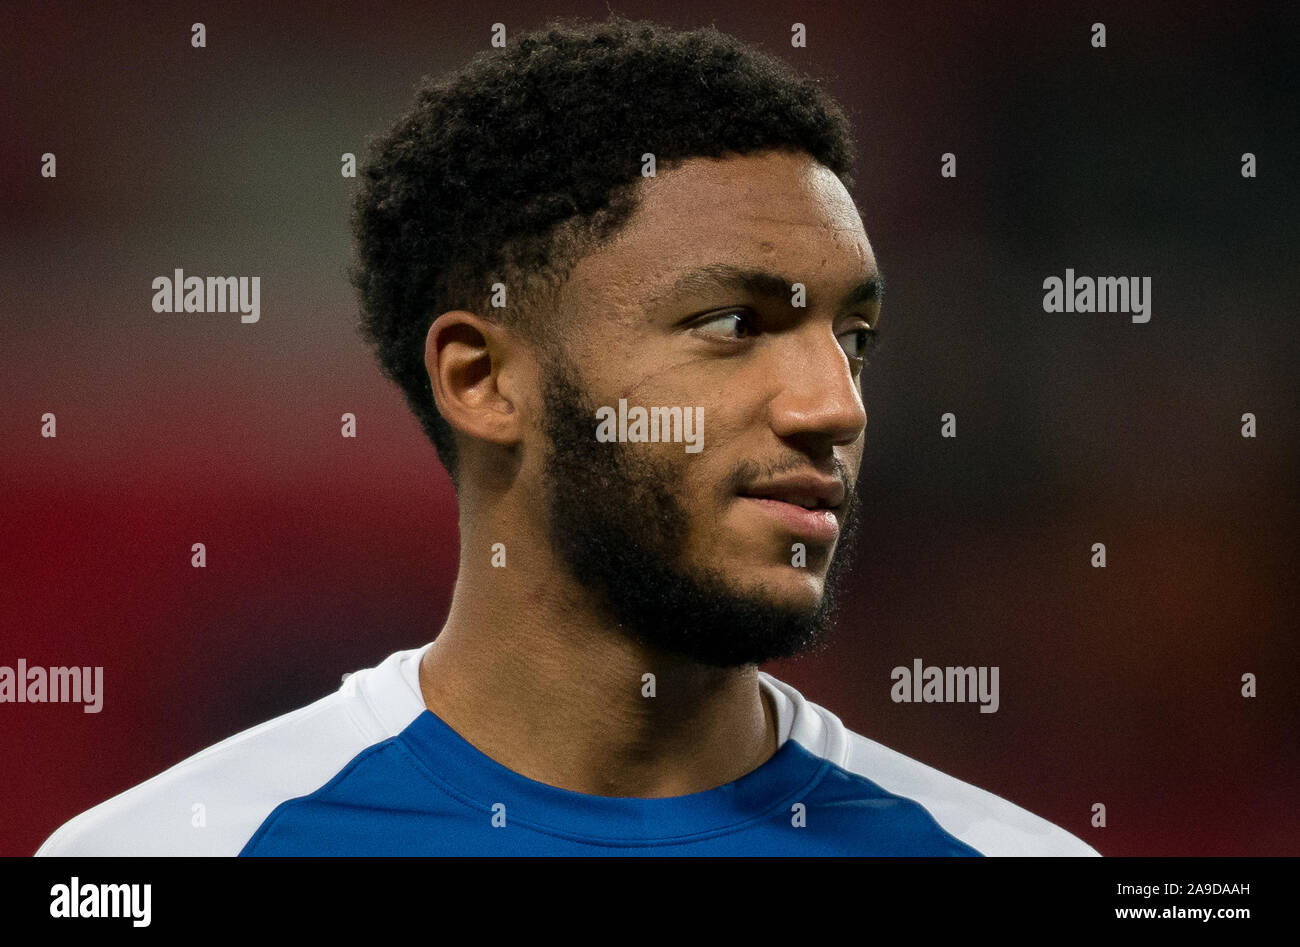 London, UK. 14th Nov, 2019. Joe Gomez (Liverpool) of England pre match during the UEFA Euro 2020 qualifier International match between England and Montenegro at Wembley Stadium, London, England on 14 November 2019. Photo by Andy Rowland. Credit: PRiME Media Images/Alamy Live News Stock Photo